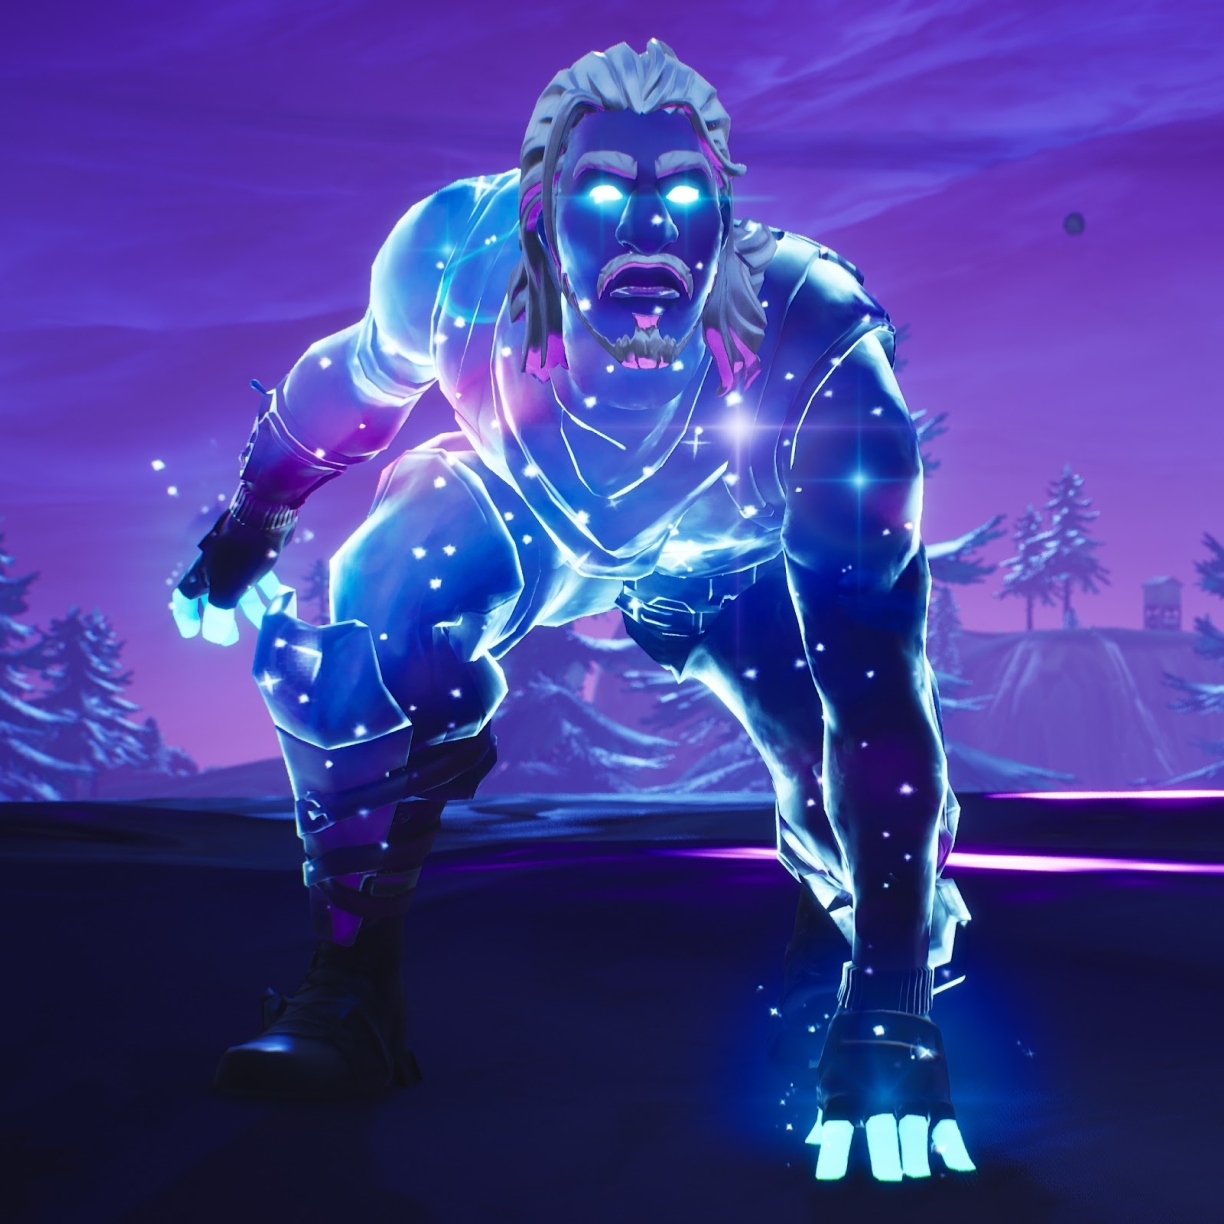 1224x1224 Fortnite Galaxy 1224x1224 Resolution Wallpaper Hd Games 4k Wallpapers Images Photos And Background